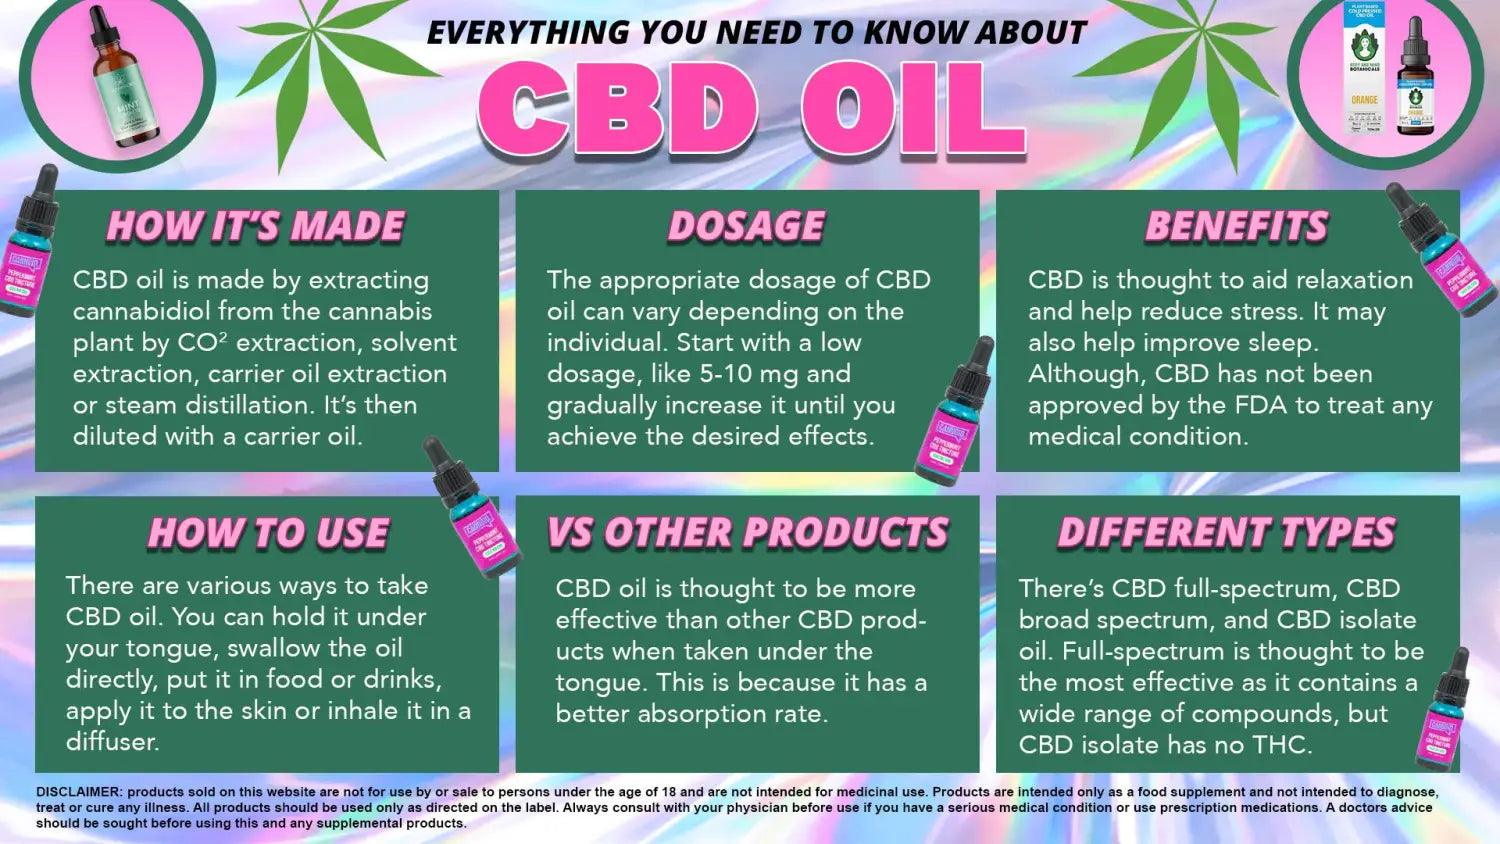 HOW TO FIND CBD OIL NEAR